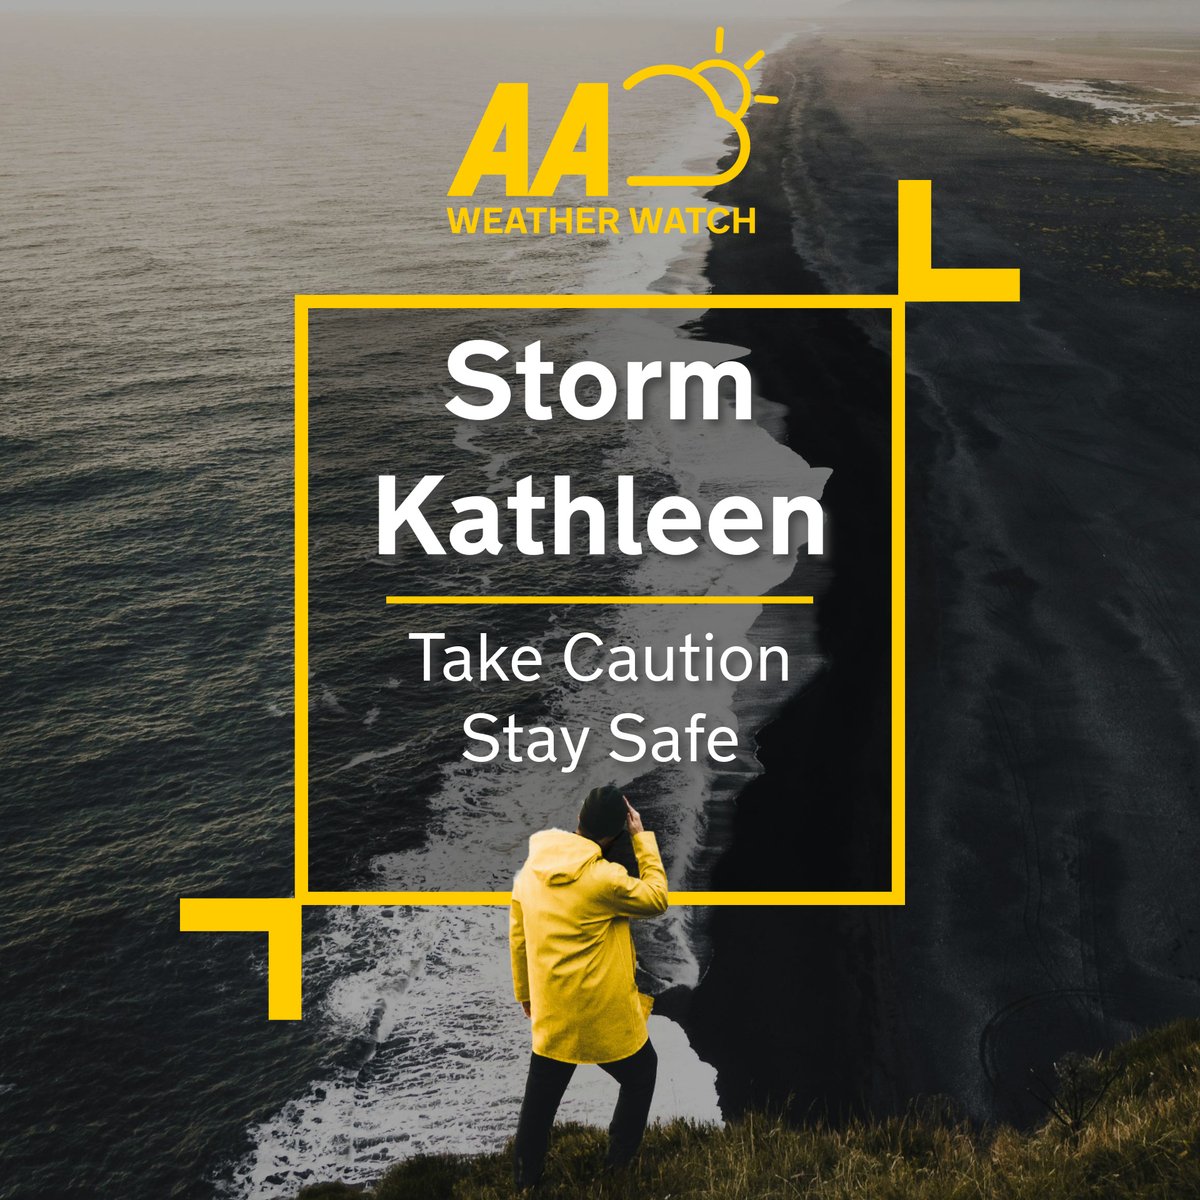 ⚠️ #StormKathleen brings strong winds to Ireland tomorrow. Exercise caution & check our top 10 driving tips for windy conditions: aa.ie/3OdNcoS 🌬️ Need help? Use our AA App: aa.ie/download or call 𝟬𝟴𝟭𝟴 𝟮𝟮𝟳 𝟮𝟮𝟴. Stay safe 💛 #WeatherWarning